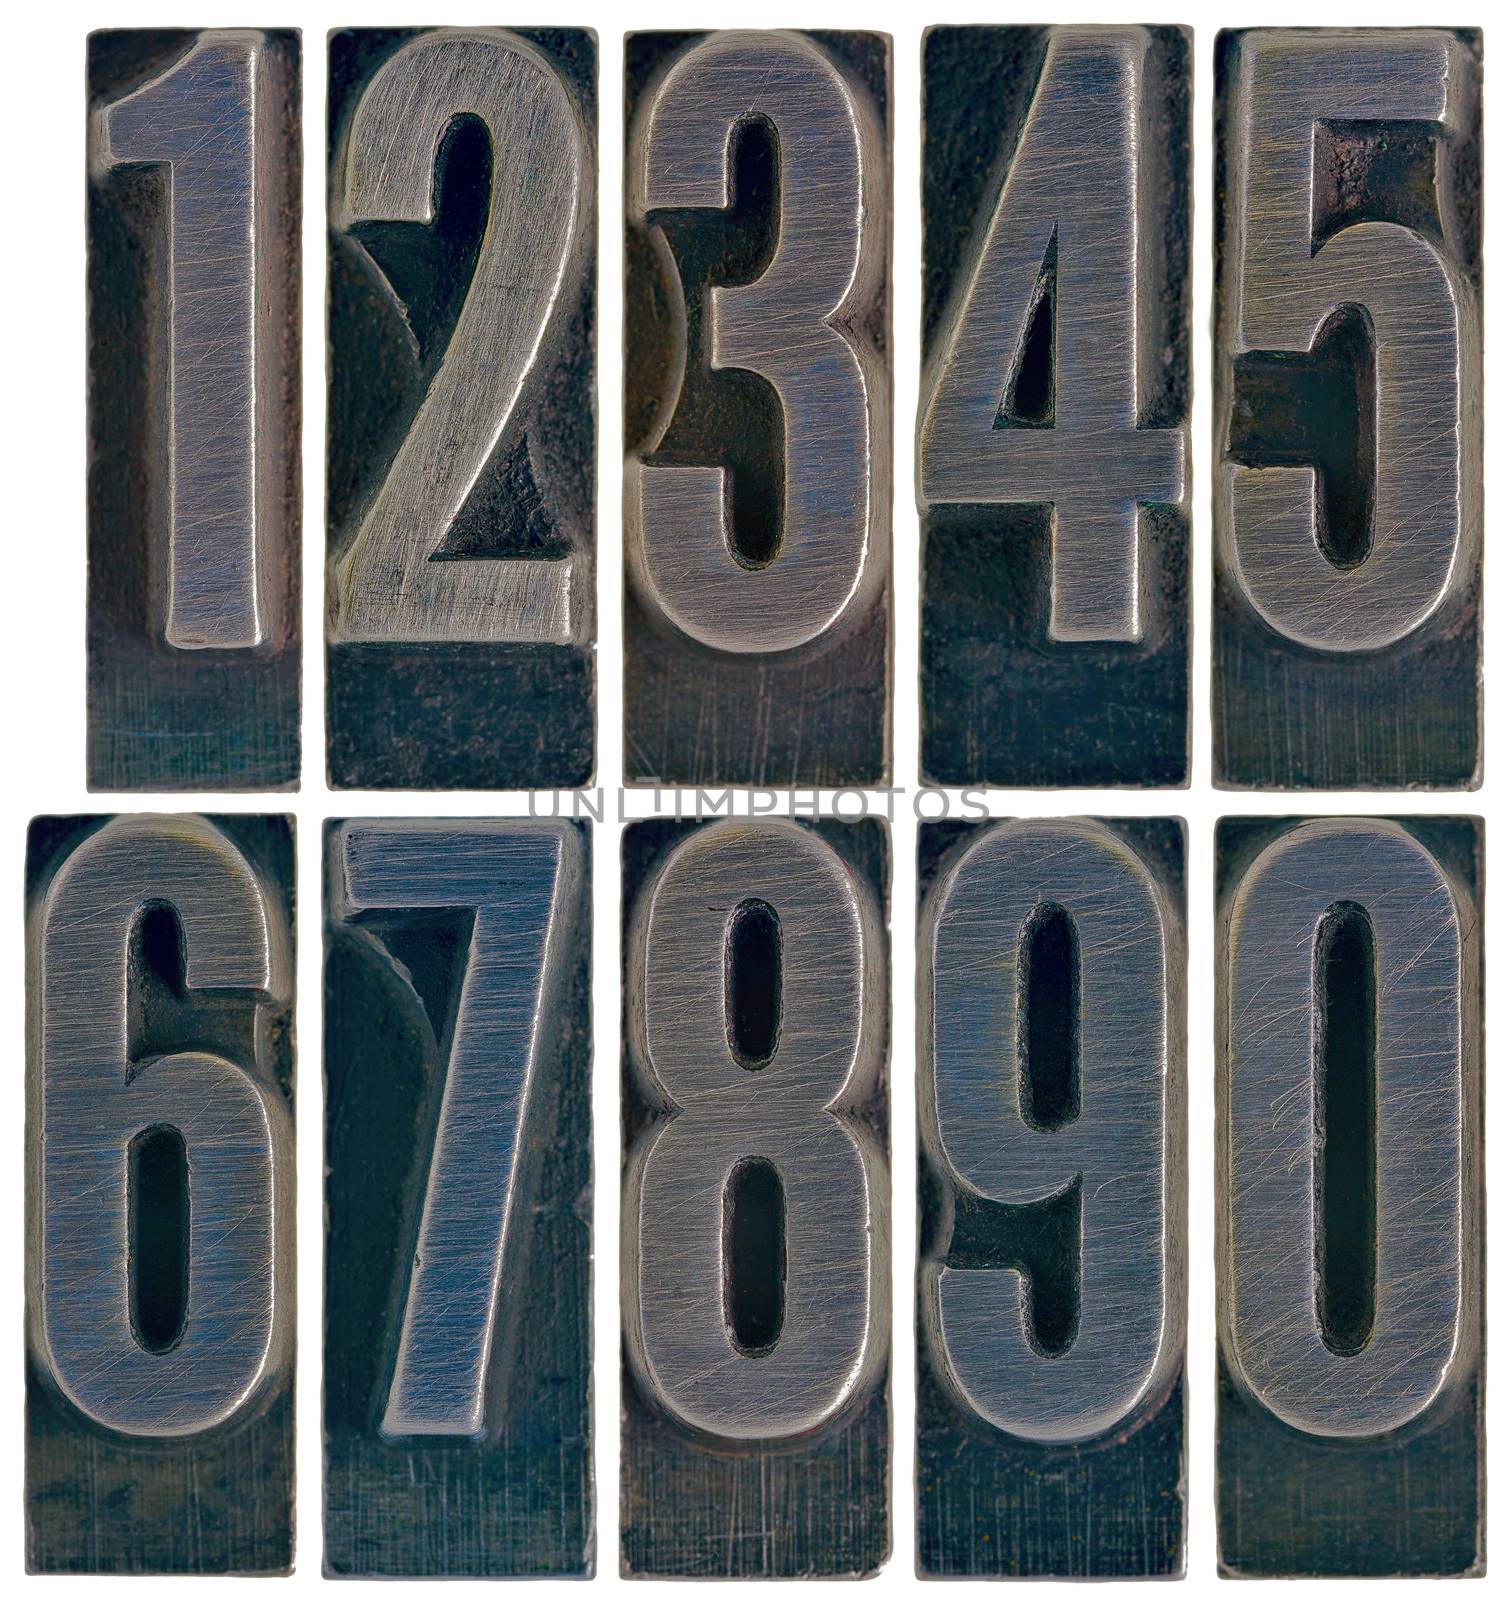 ten arabic numerals 0 to 9 in old grunge metal letterpress printing blocks isolated on white